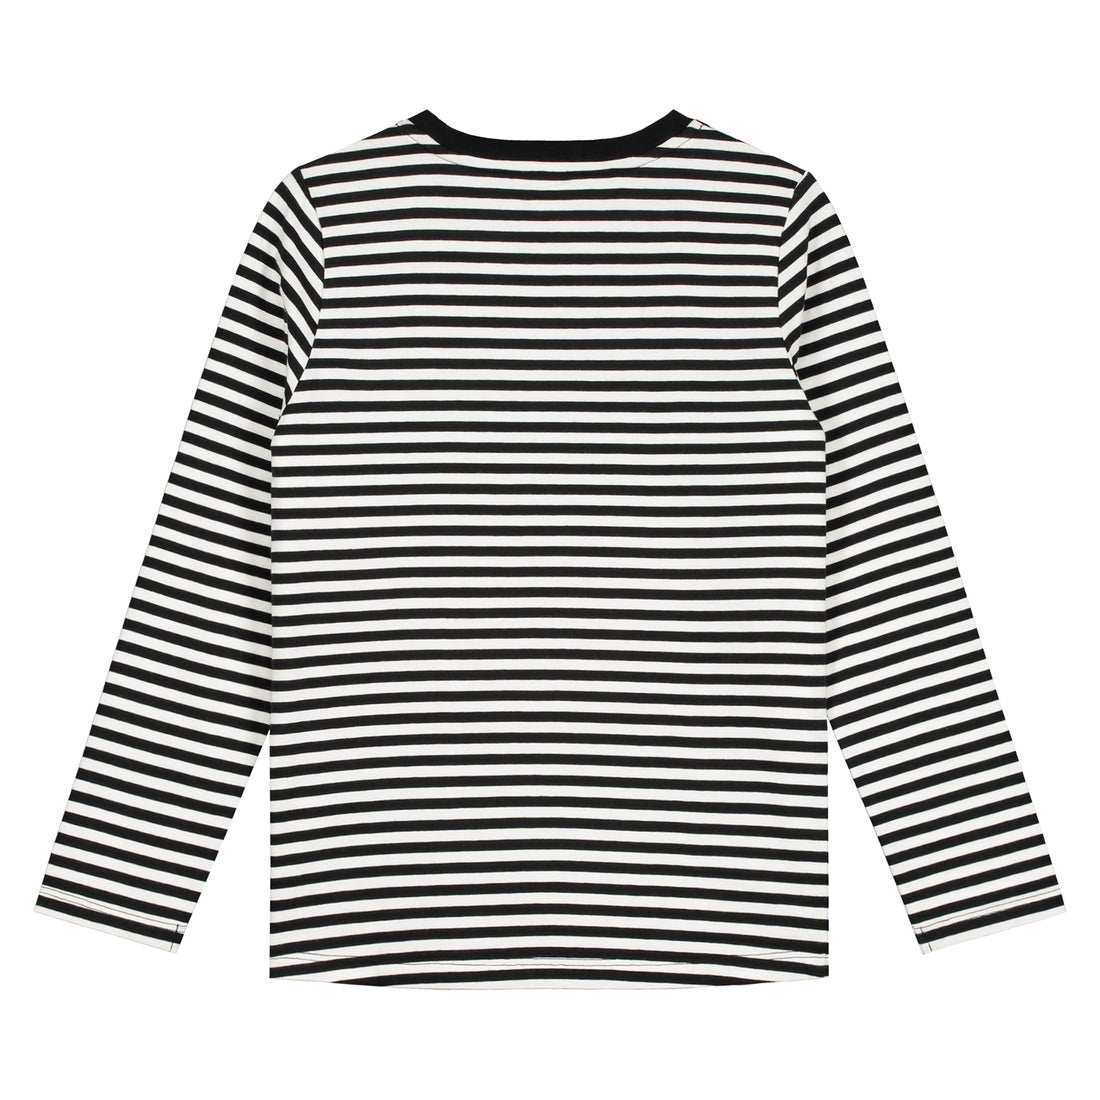 long sleeve tee nearly black off white